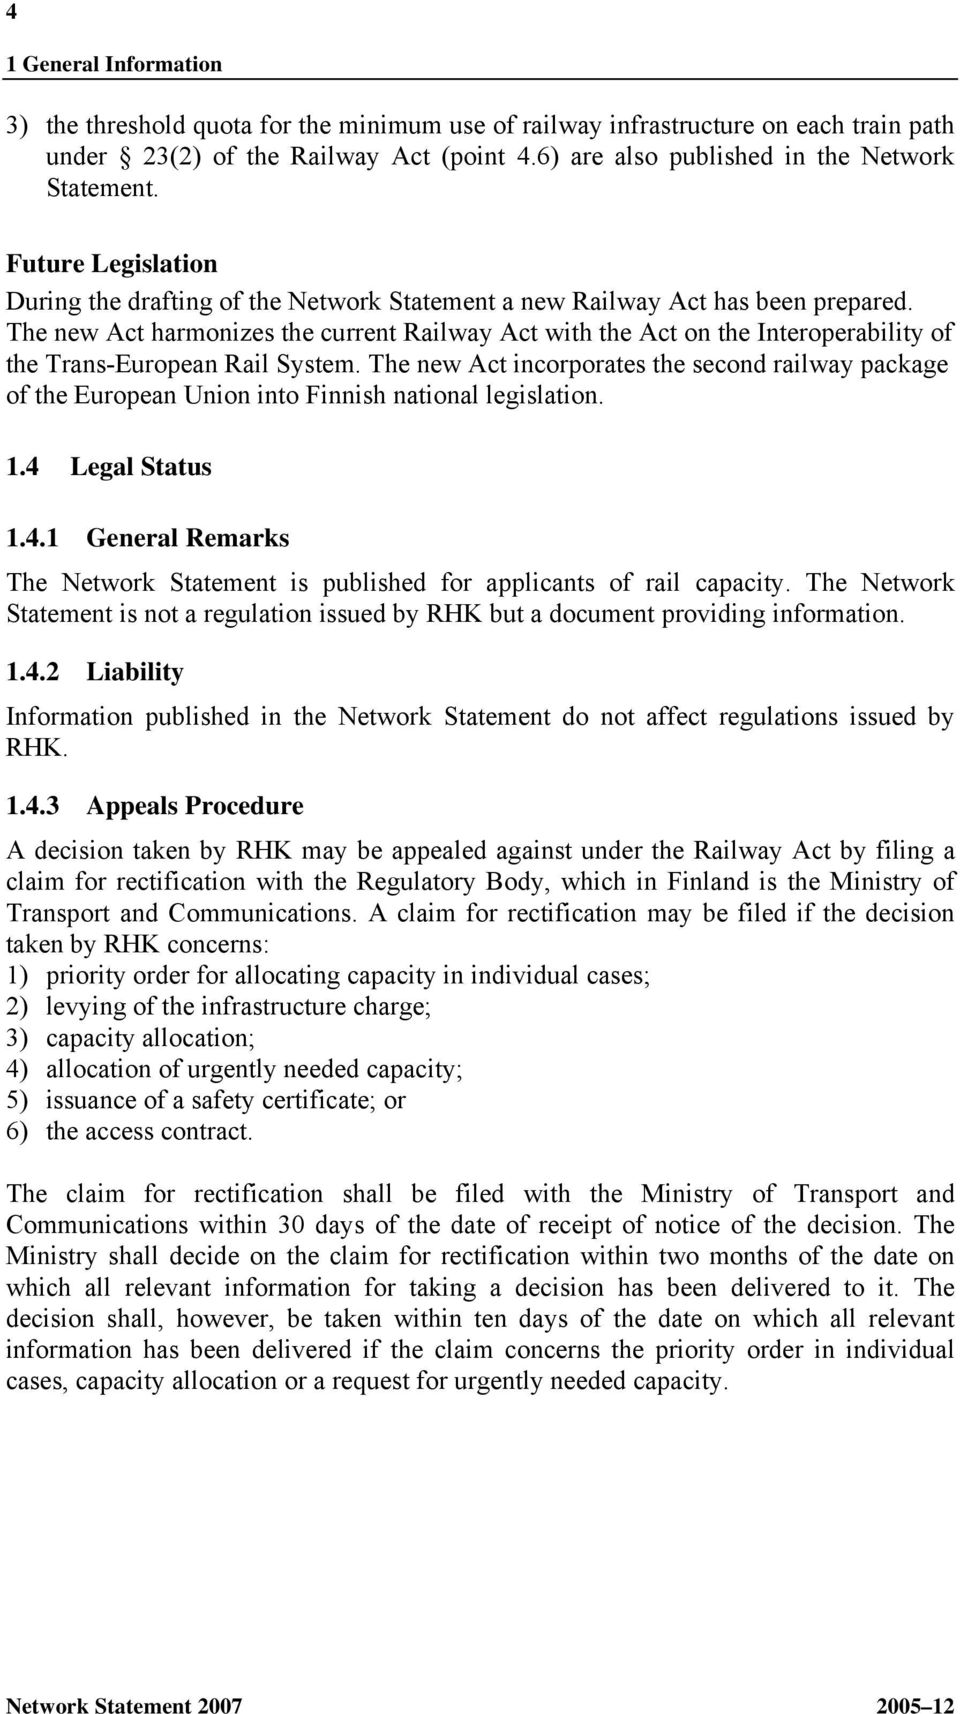 The new Act harmonizes the current Railway Act with the Act on the Interoperability of the Trans-European Rail System.